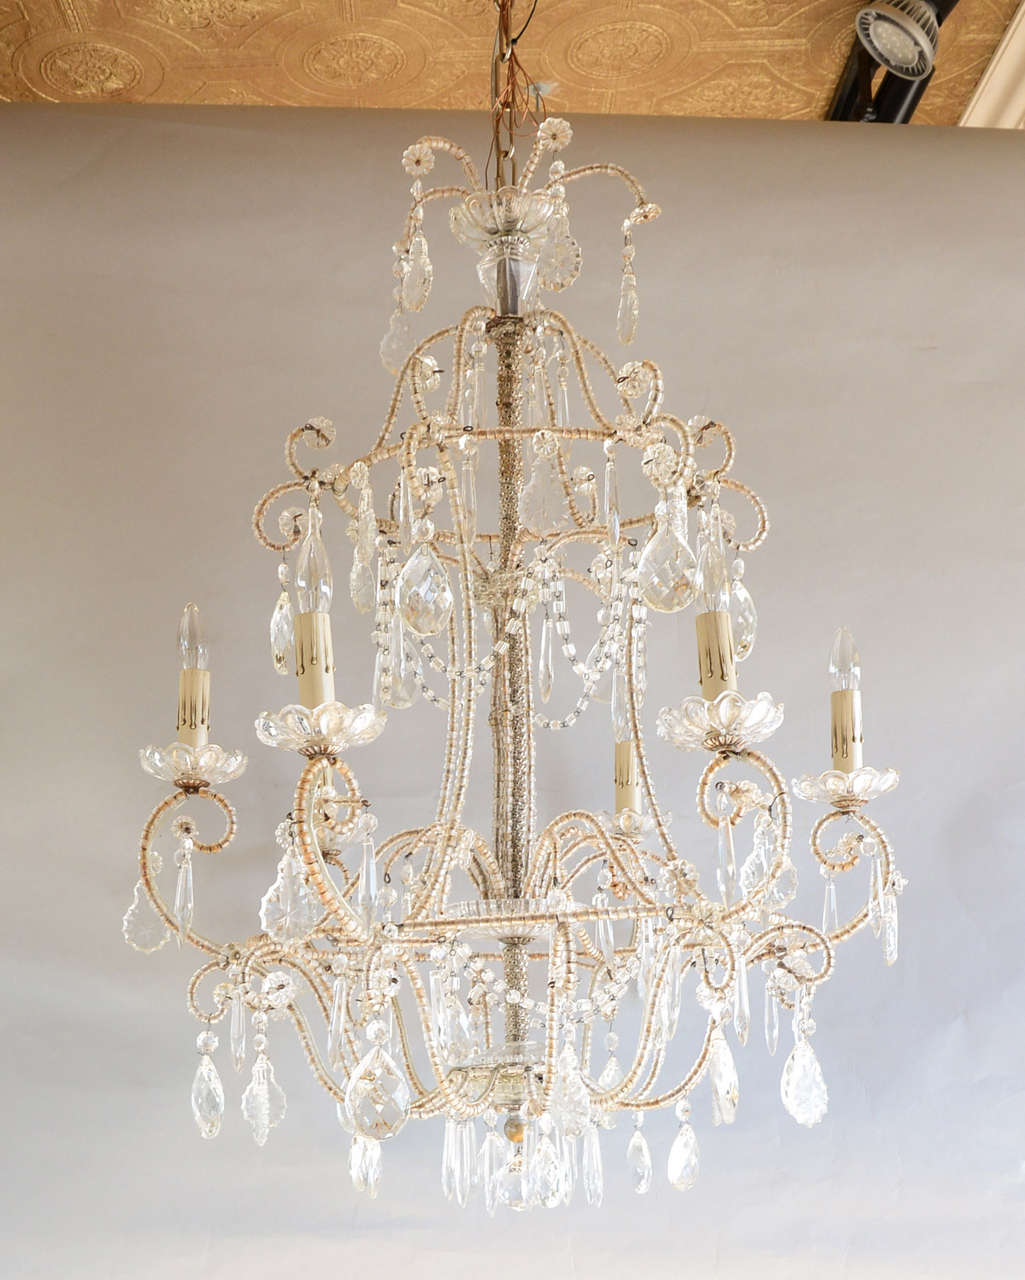 Crystal chandelier, having two tiered, cage-form frame of gilded iron, entirely encased in crystal beads, six scrolling candlearms with scalloped glass bobeches; draped in crystals and prisms.

Stock ID: D6787